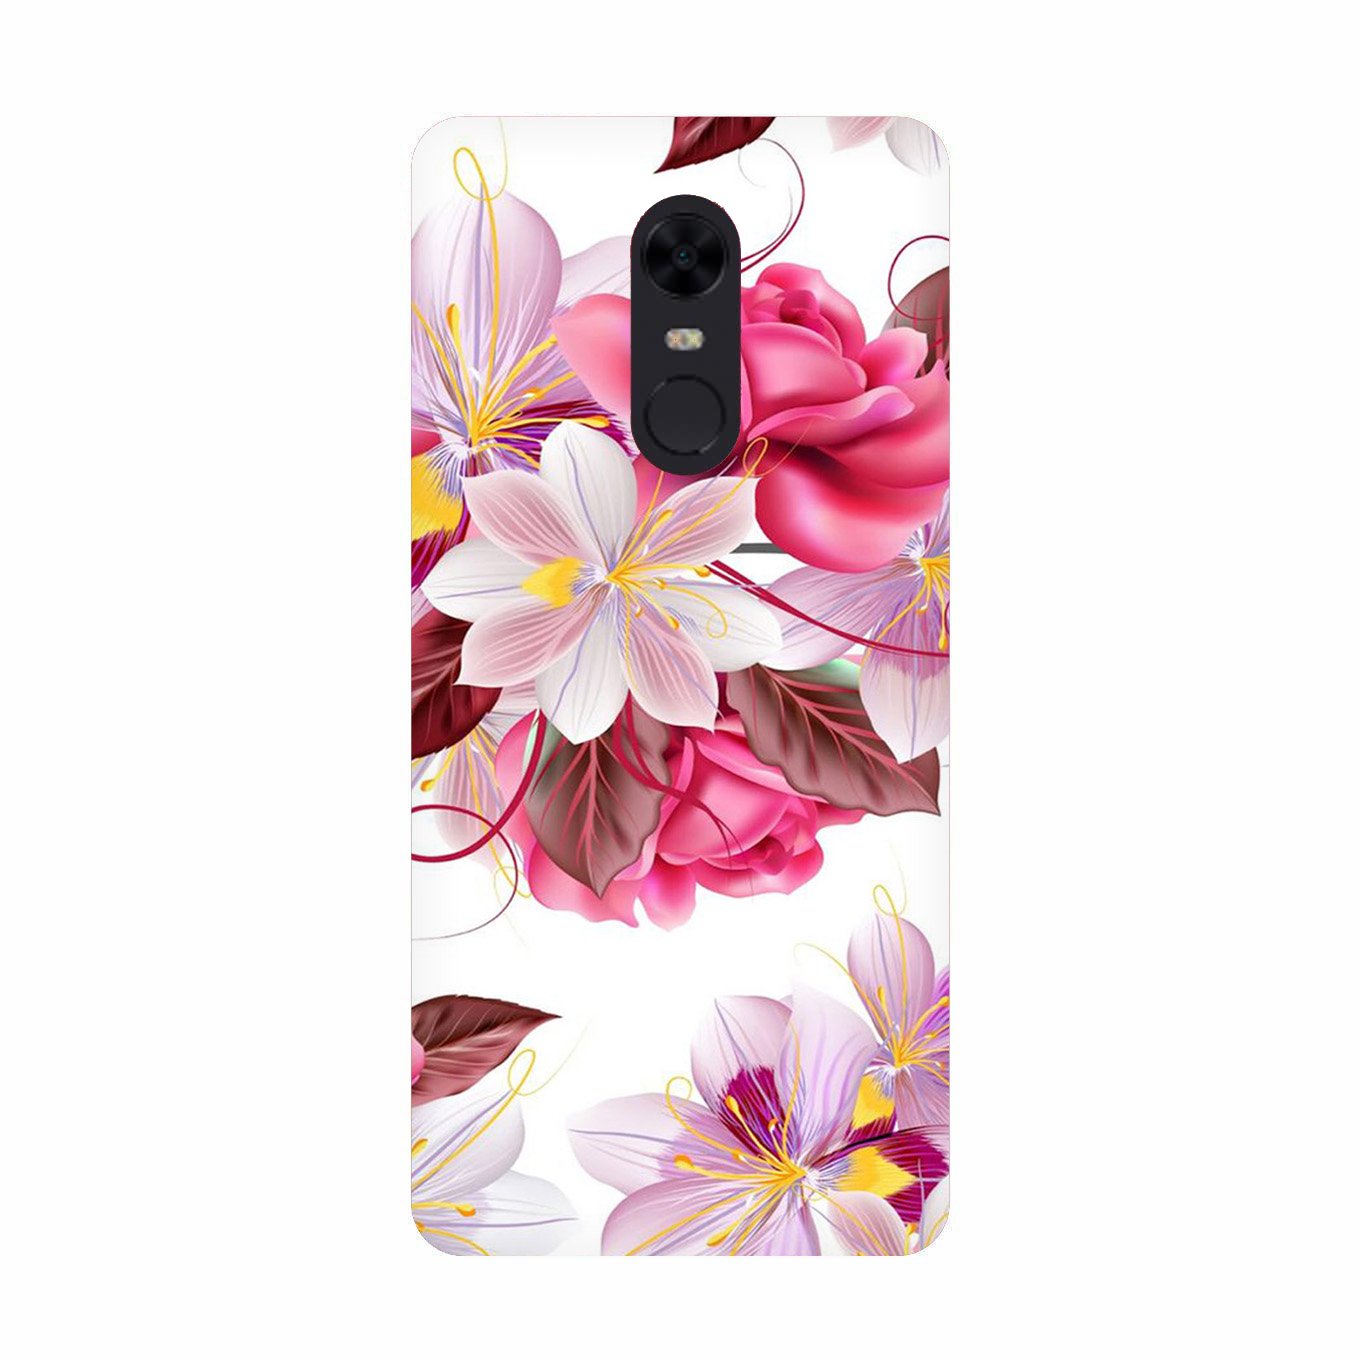 Beautiful flowers Case for Redmi 5